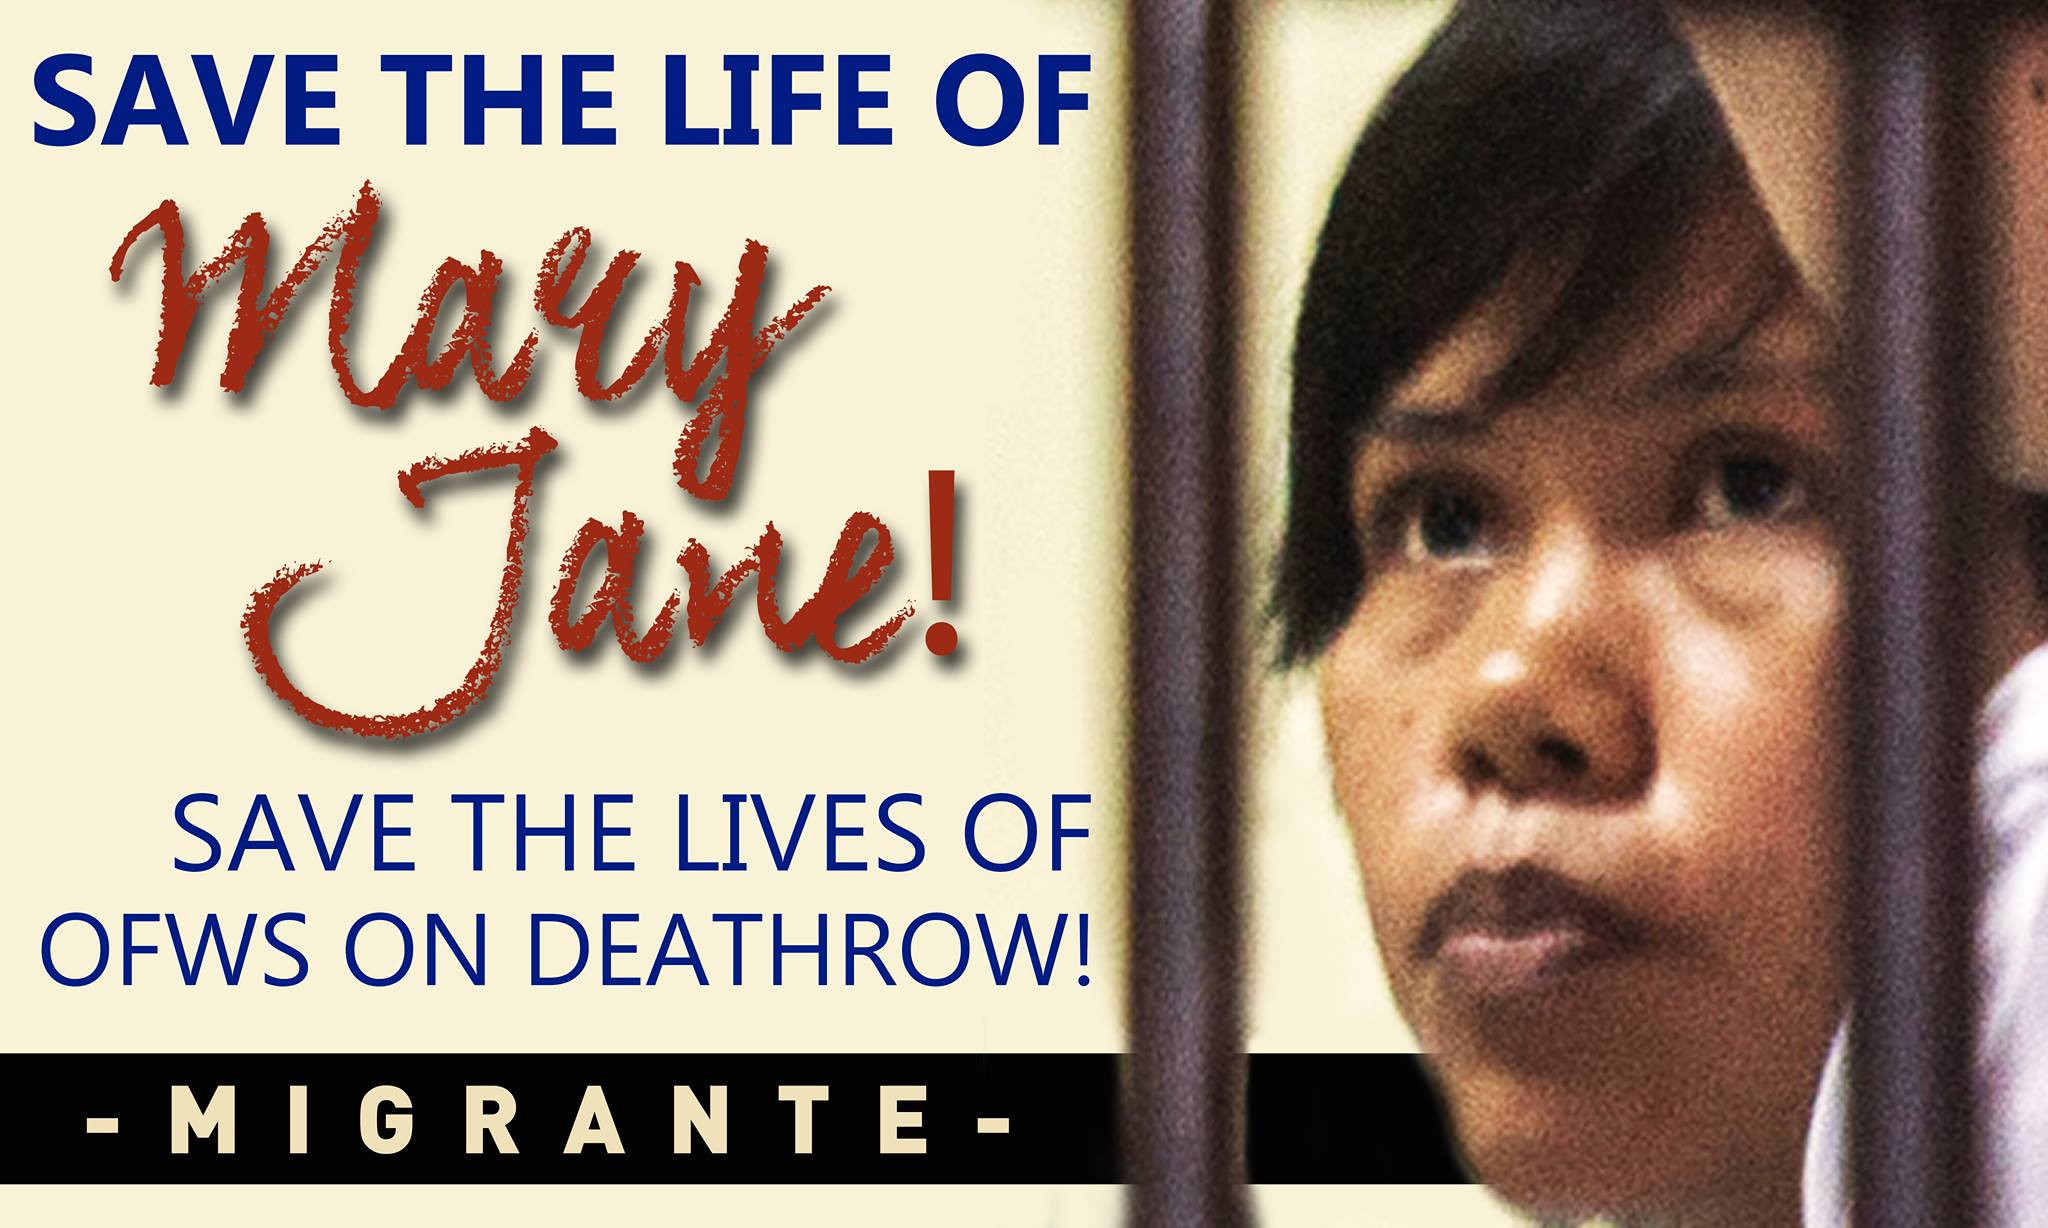 Appeal for urgent action save the life of Filipina Mary Jane.